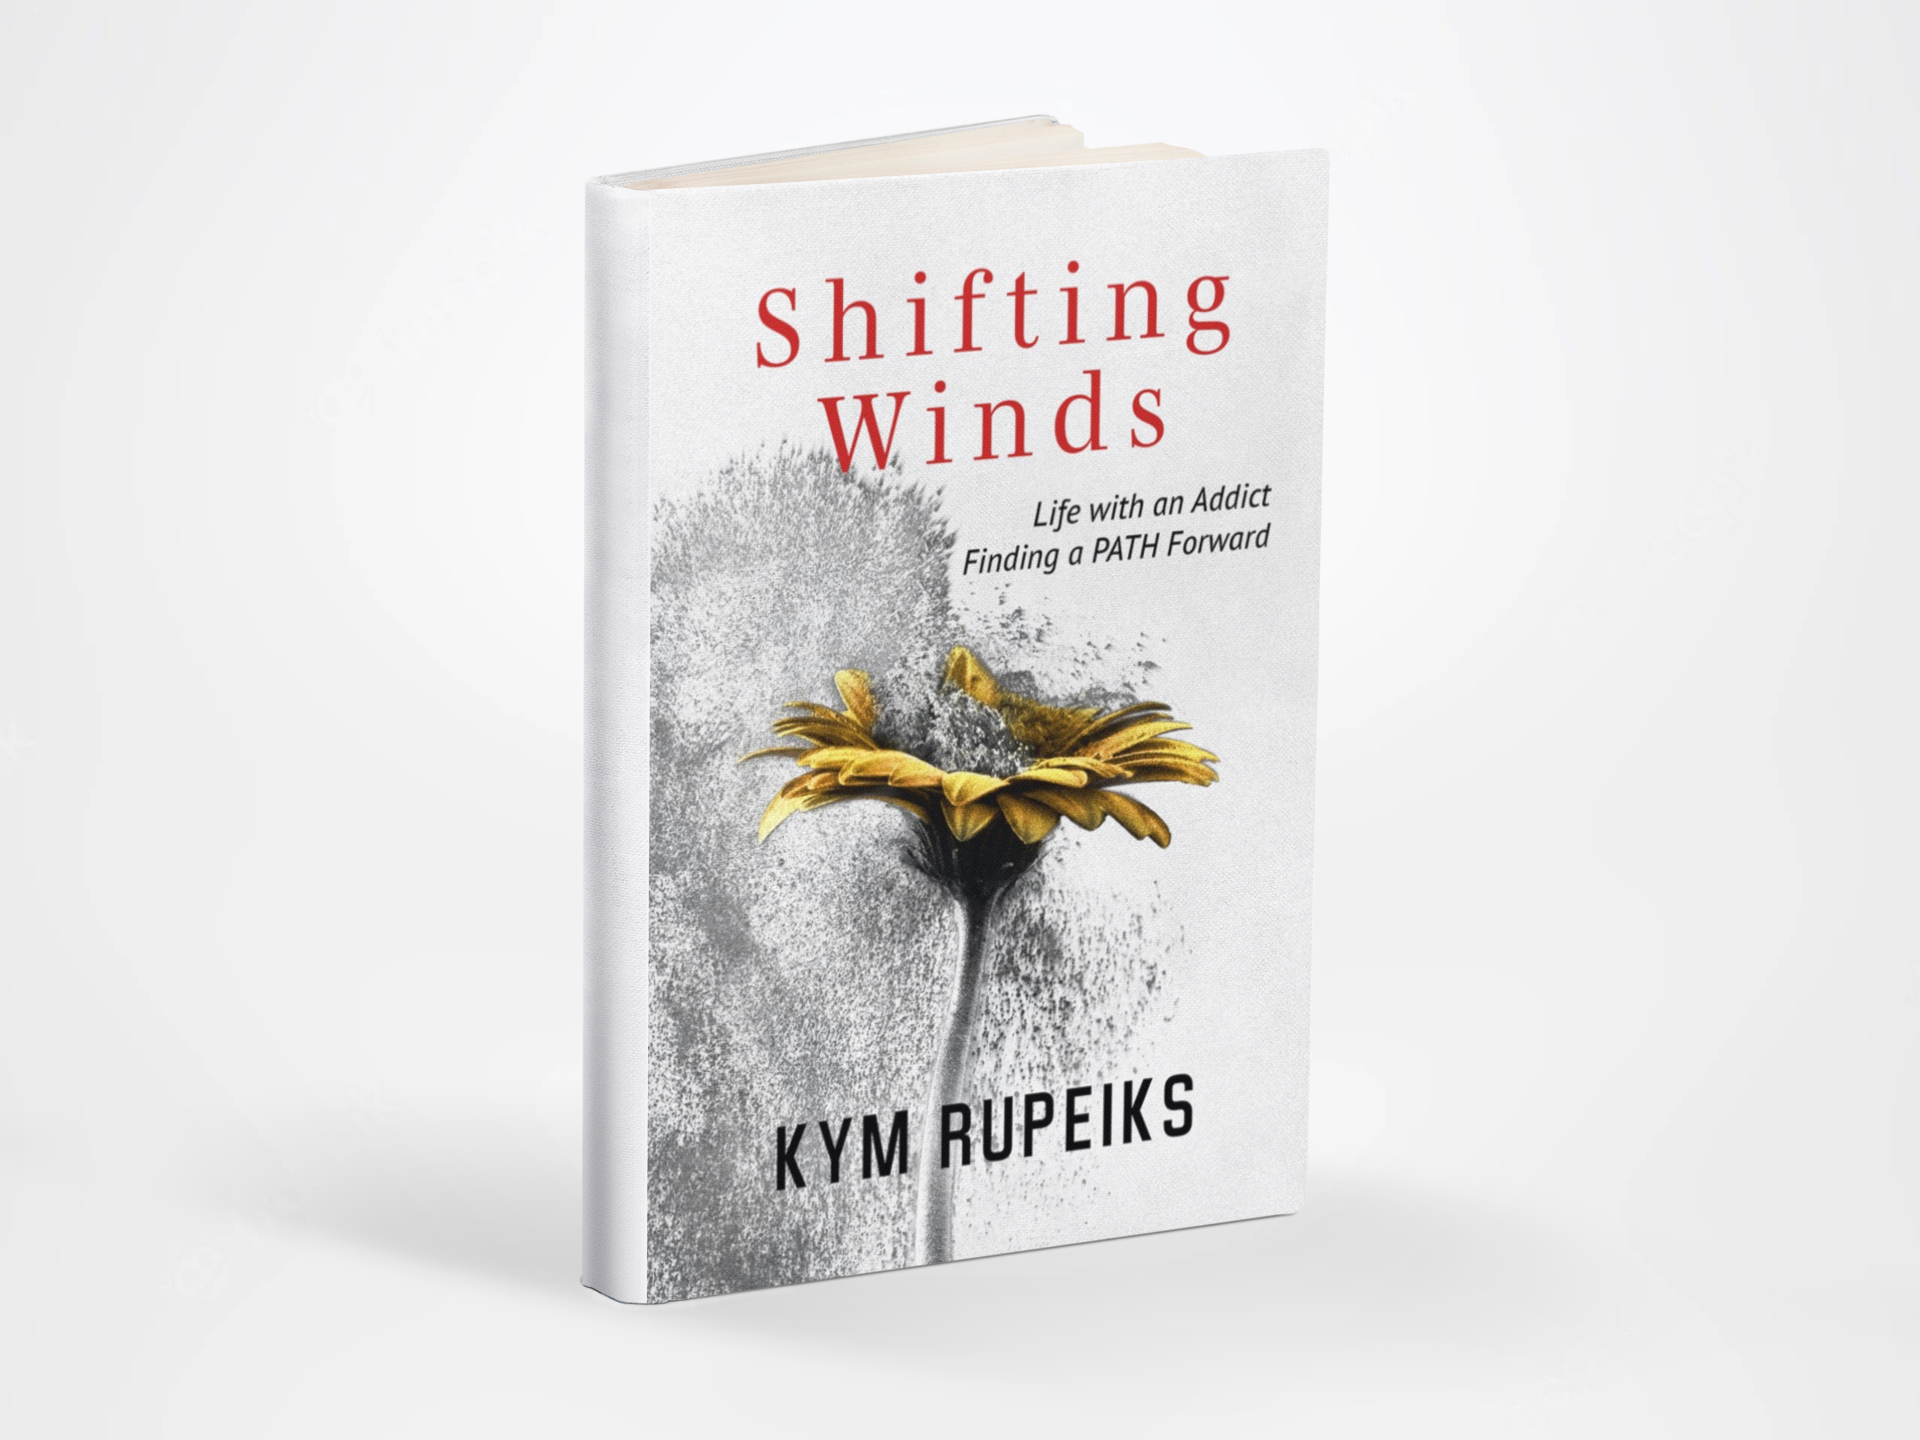 Kym Rupeiks’ Shifting Winds Offers a Powerful Framework and Healing Insights To Support Families Facing Addiction